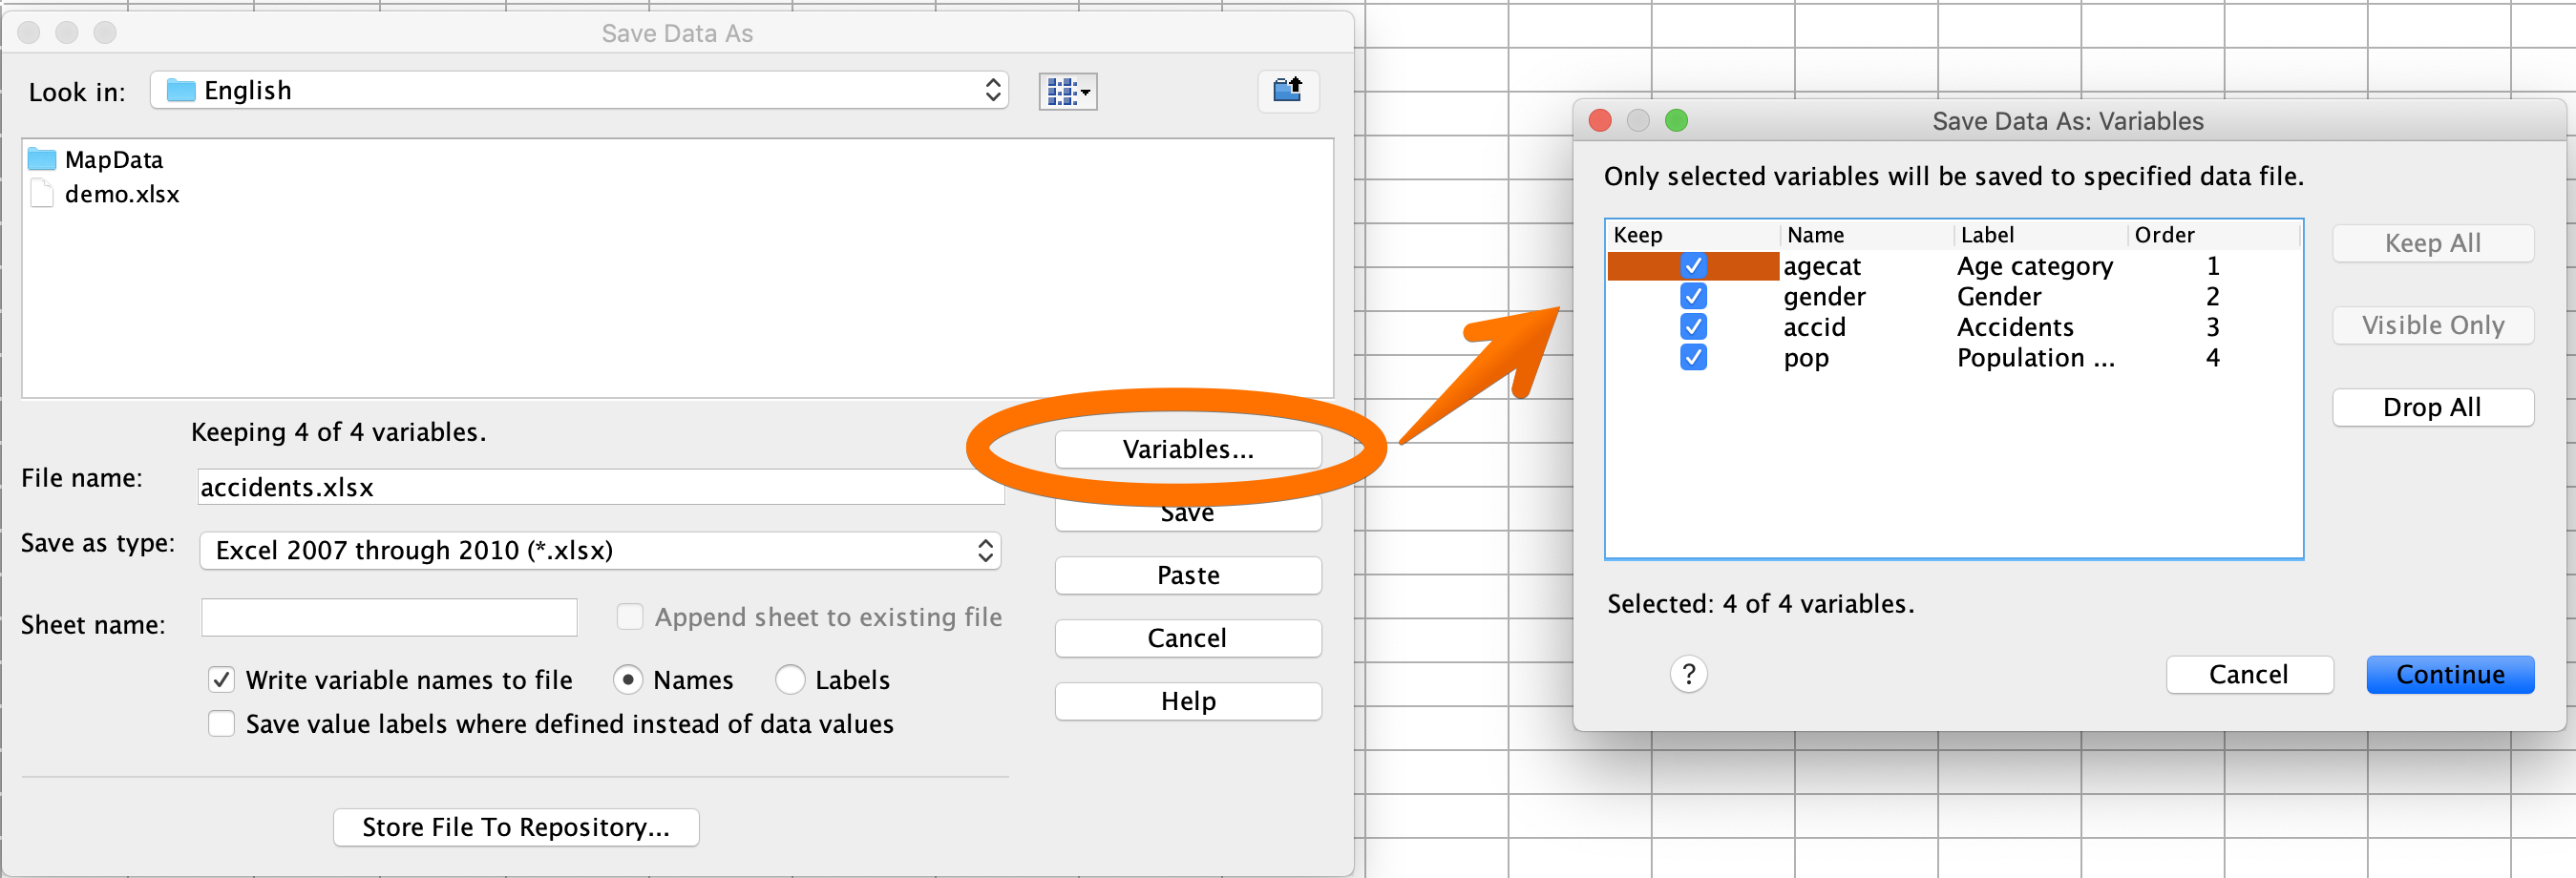 How to export selected variables to excel on IBM SPSS Statistics version 26.